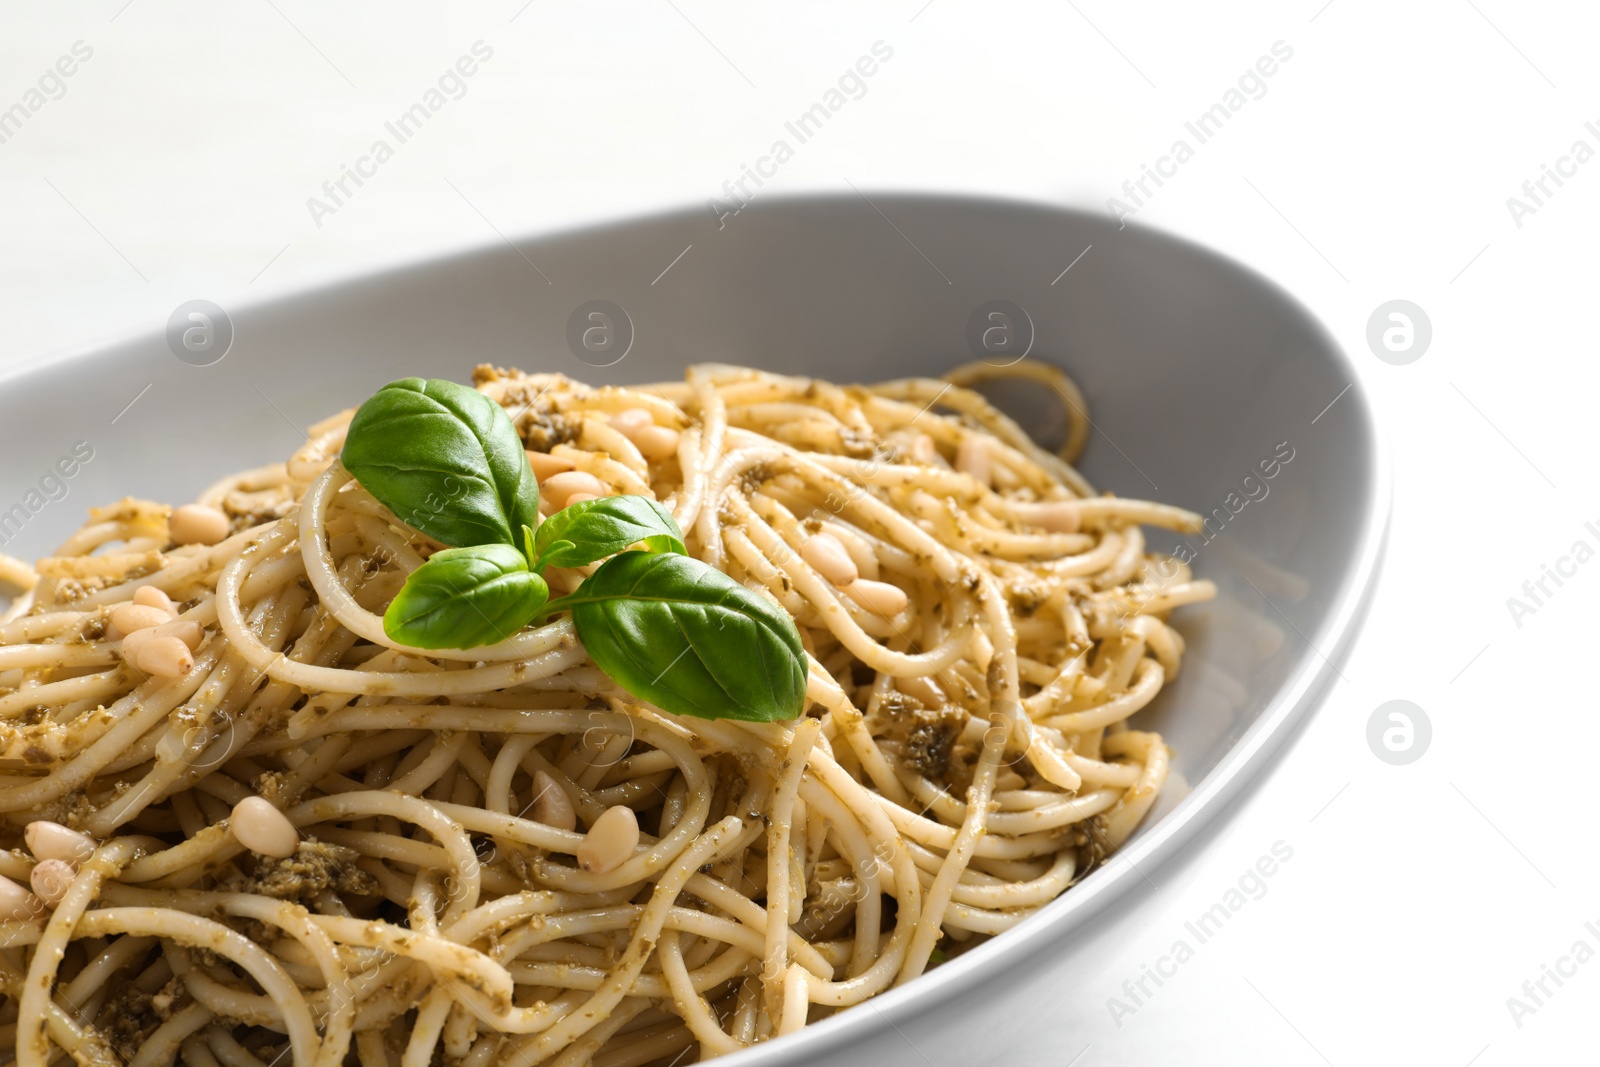 Photo of Plate of delicious basil pesto pasta on table